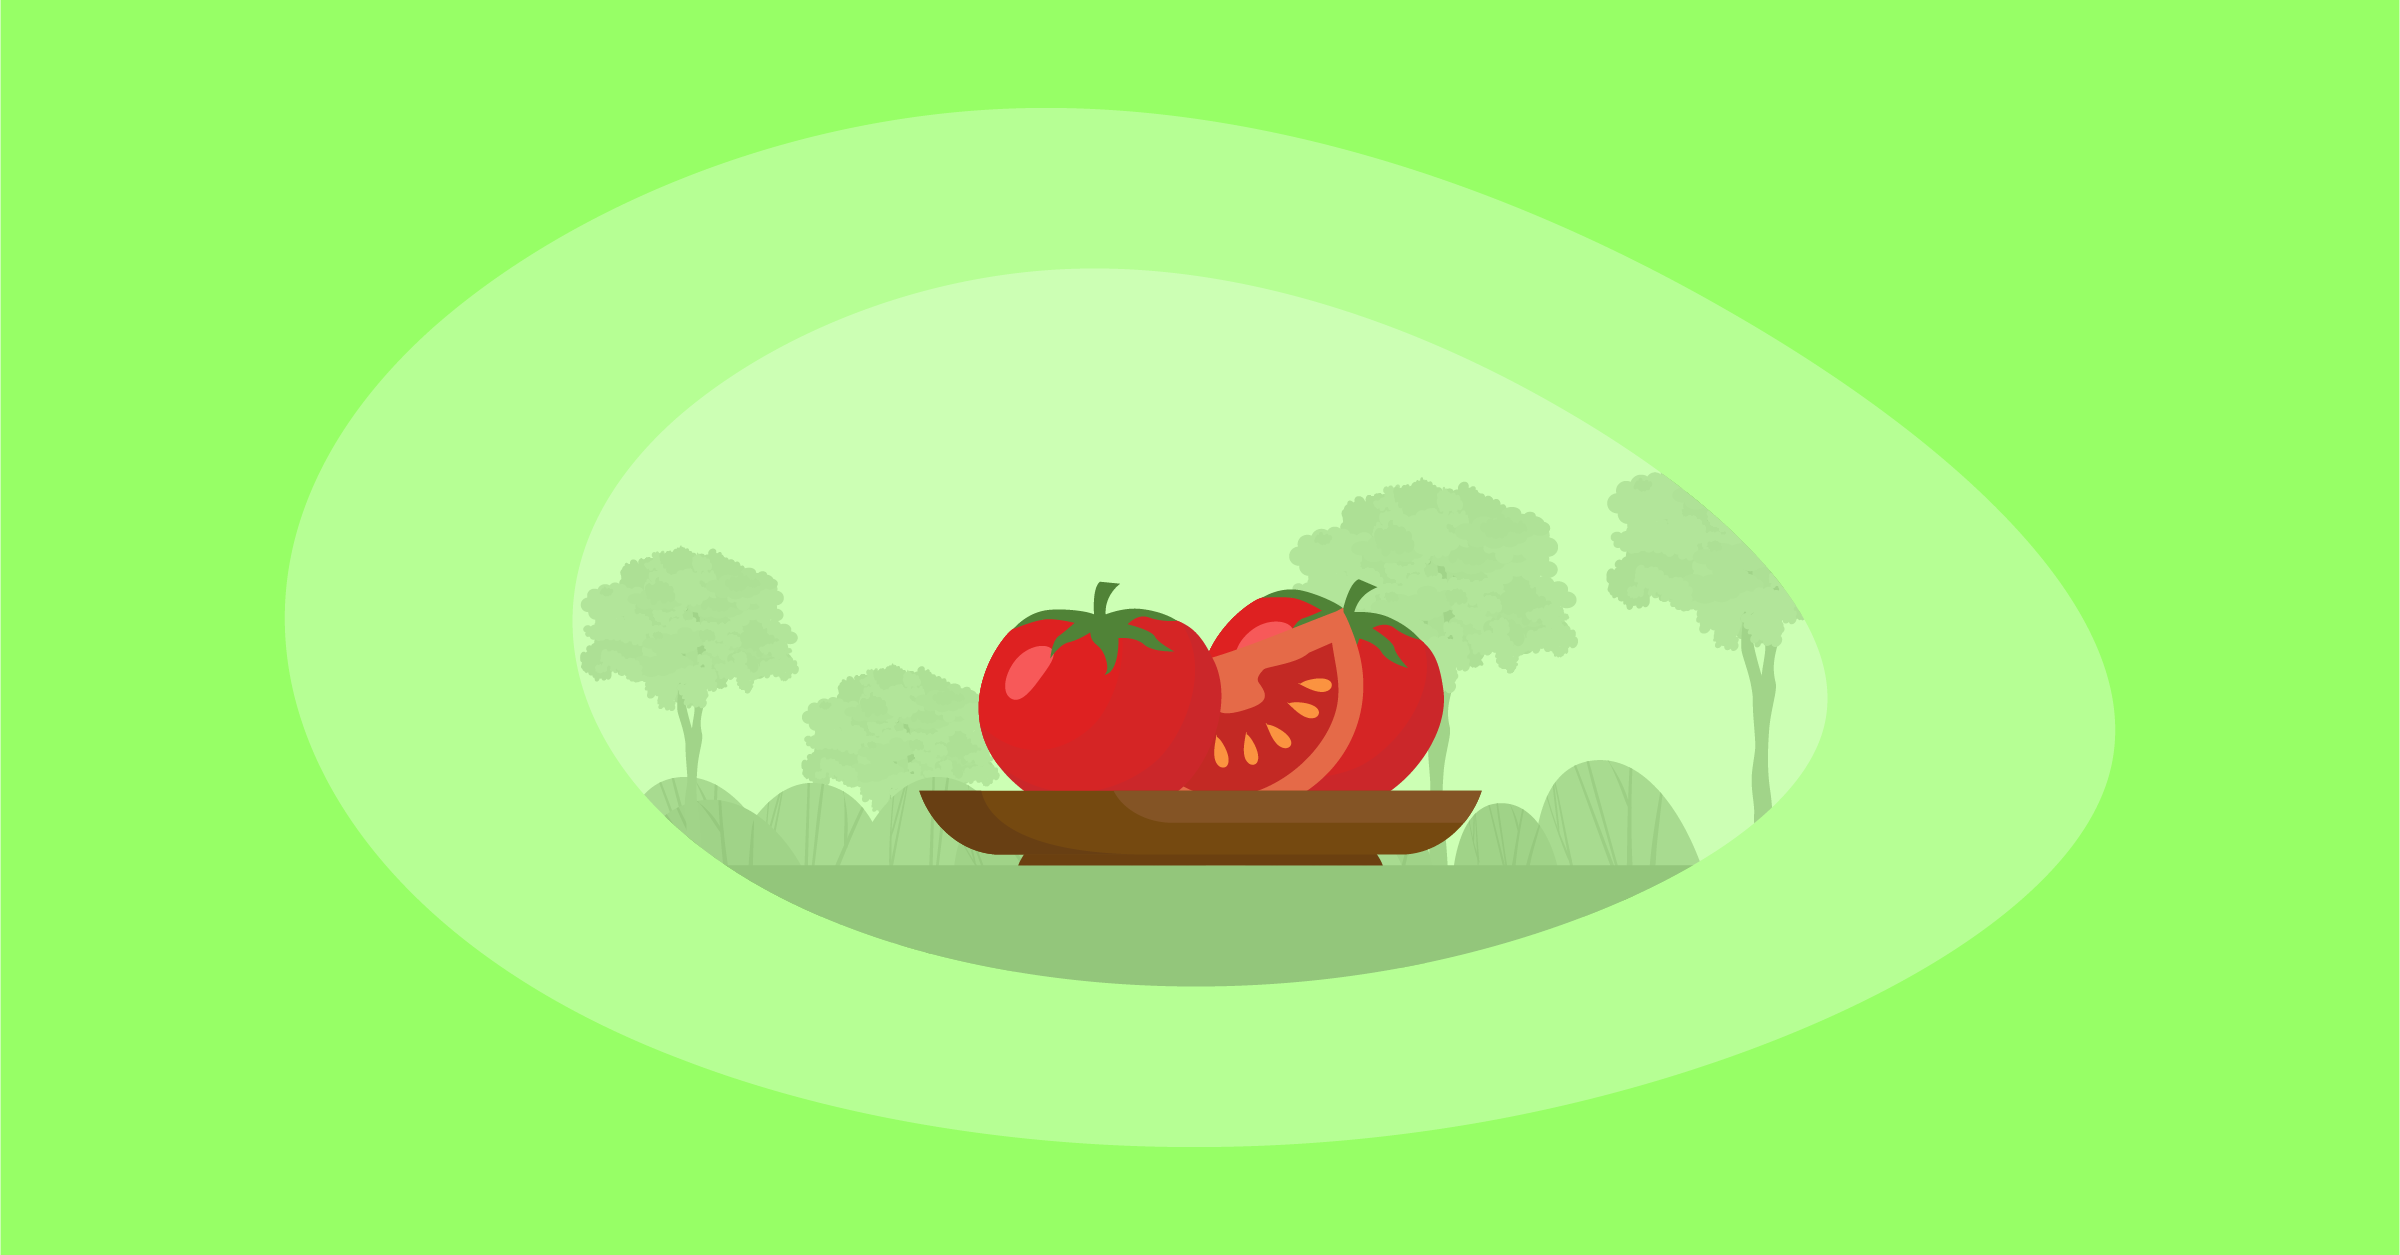 Illustration of tomatoes in a wooden platter